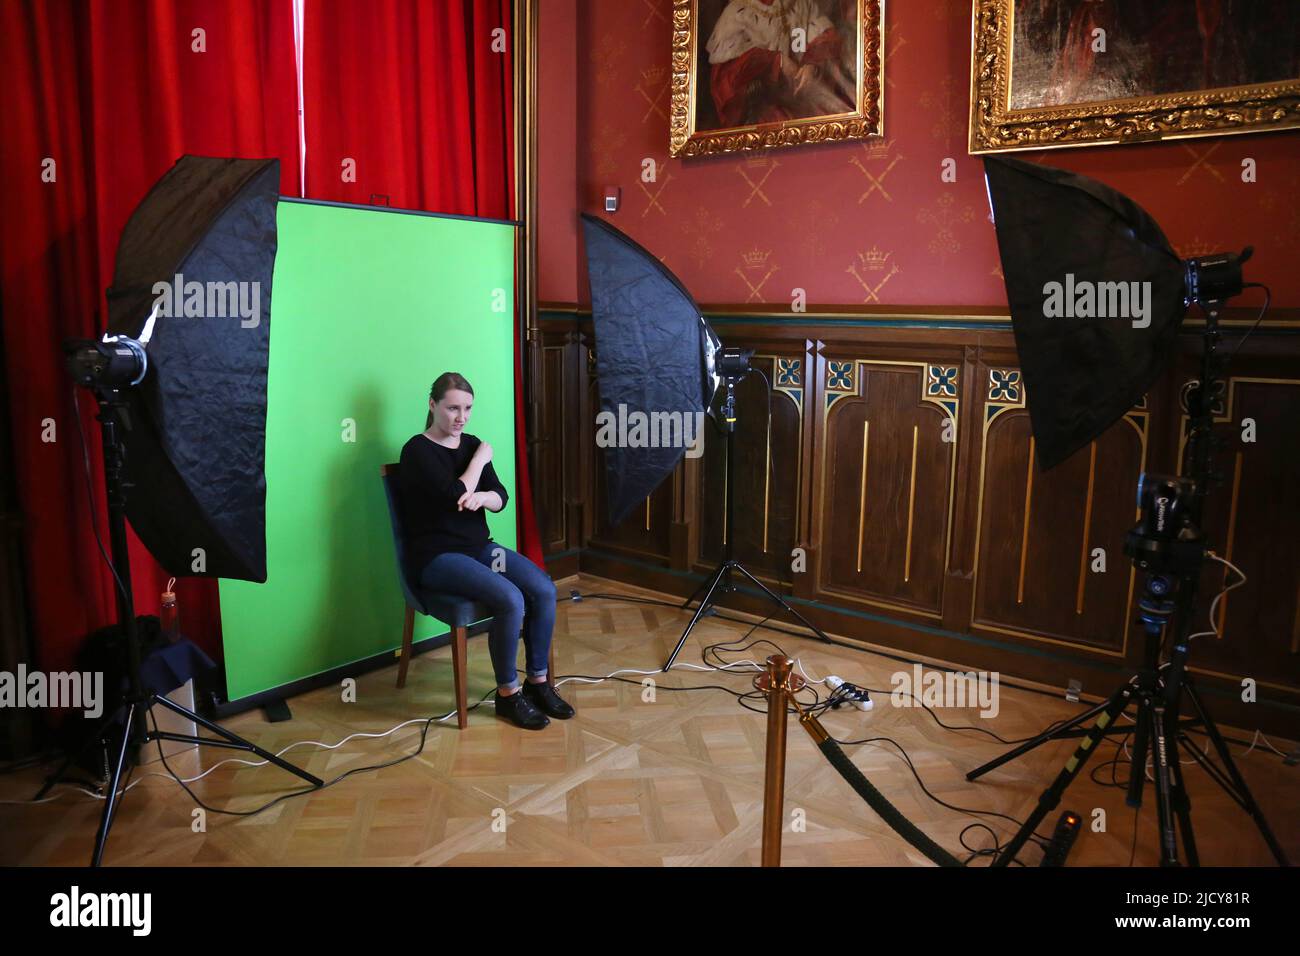 Cracow. Krakow. Poland. Female sign language interpreter works in front of the camera with the greenbox background behind her. Stock Photo